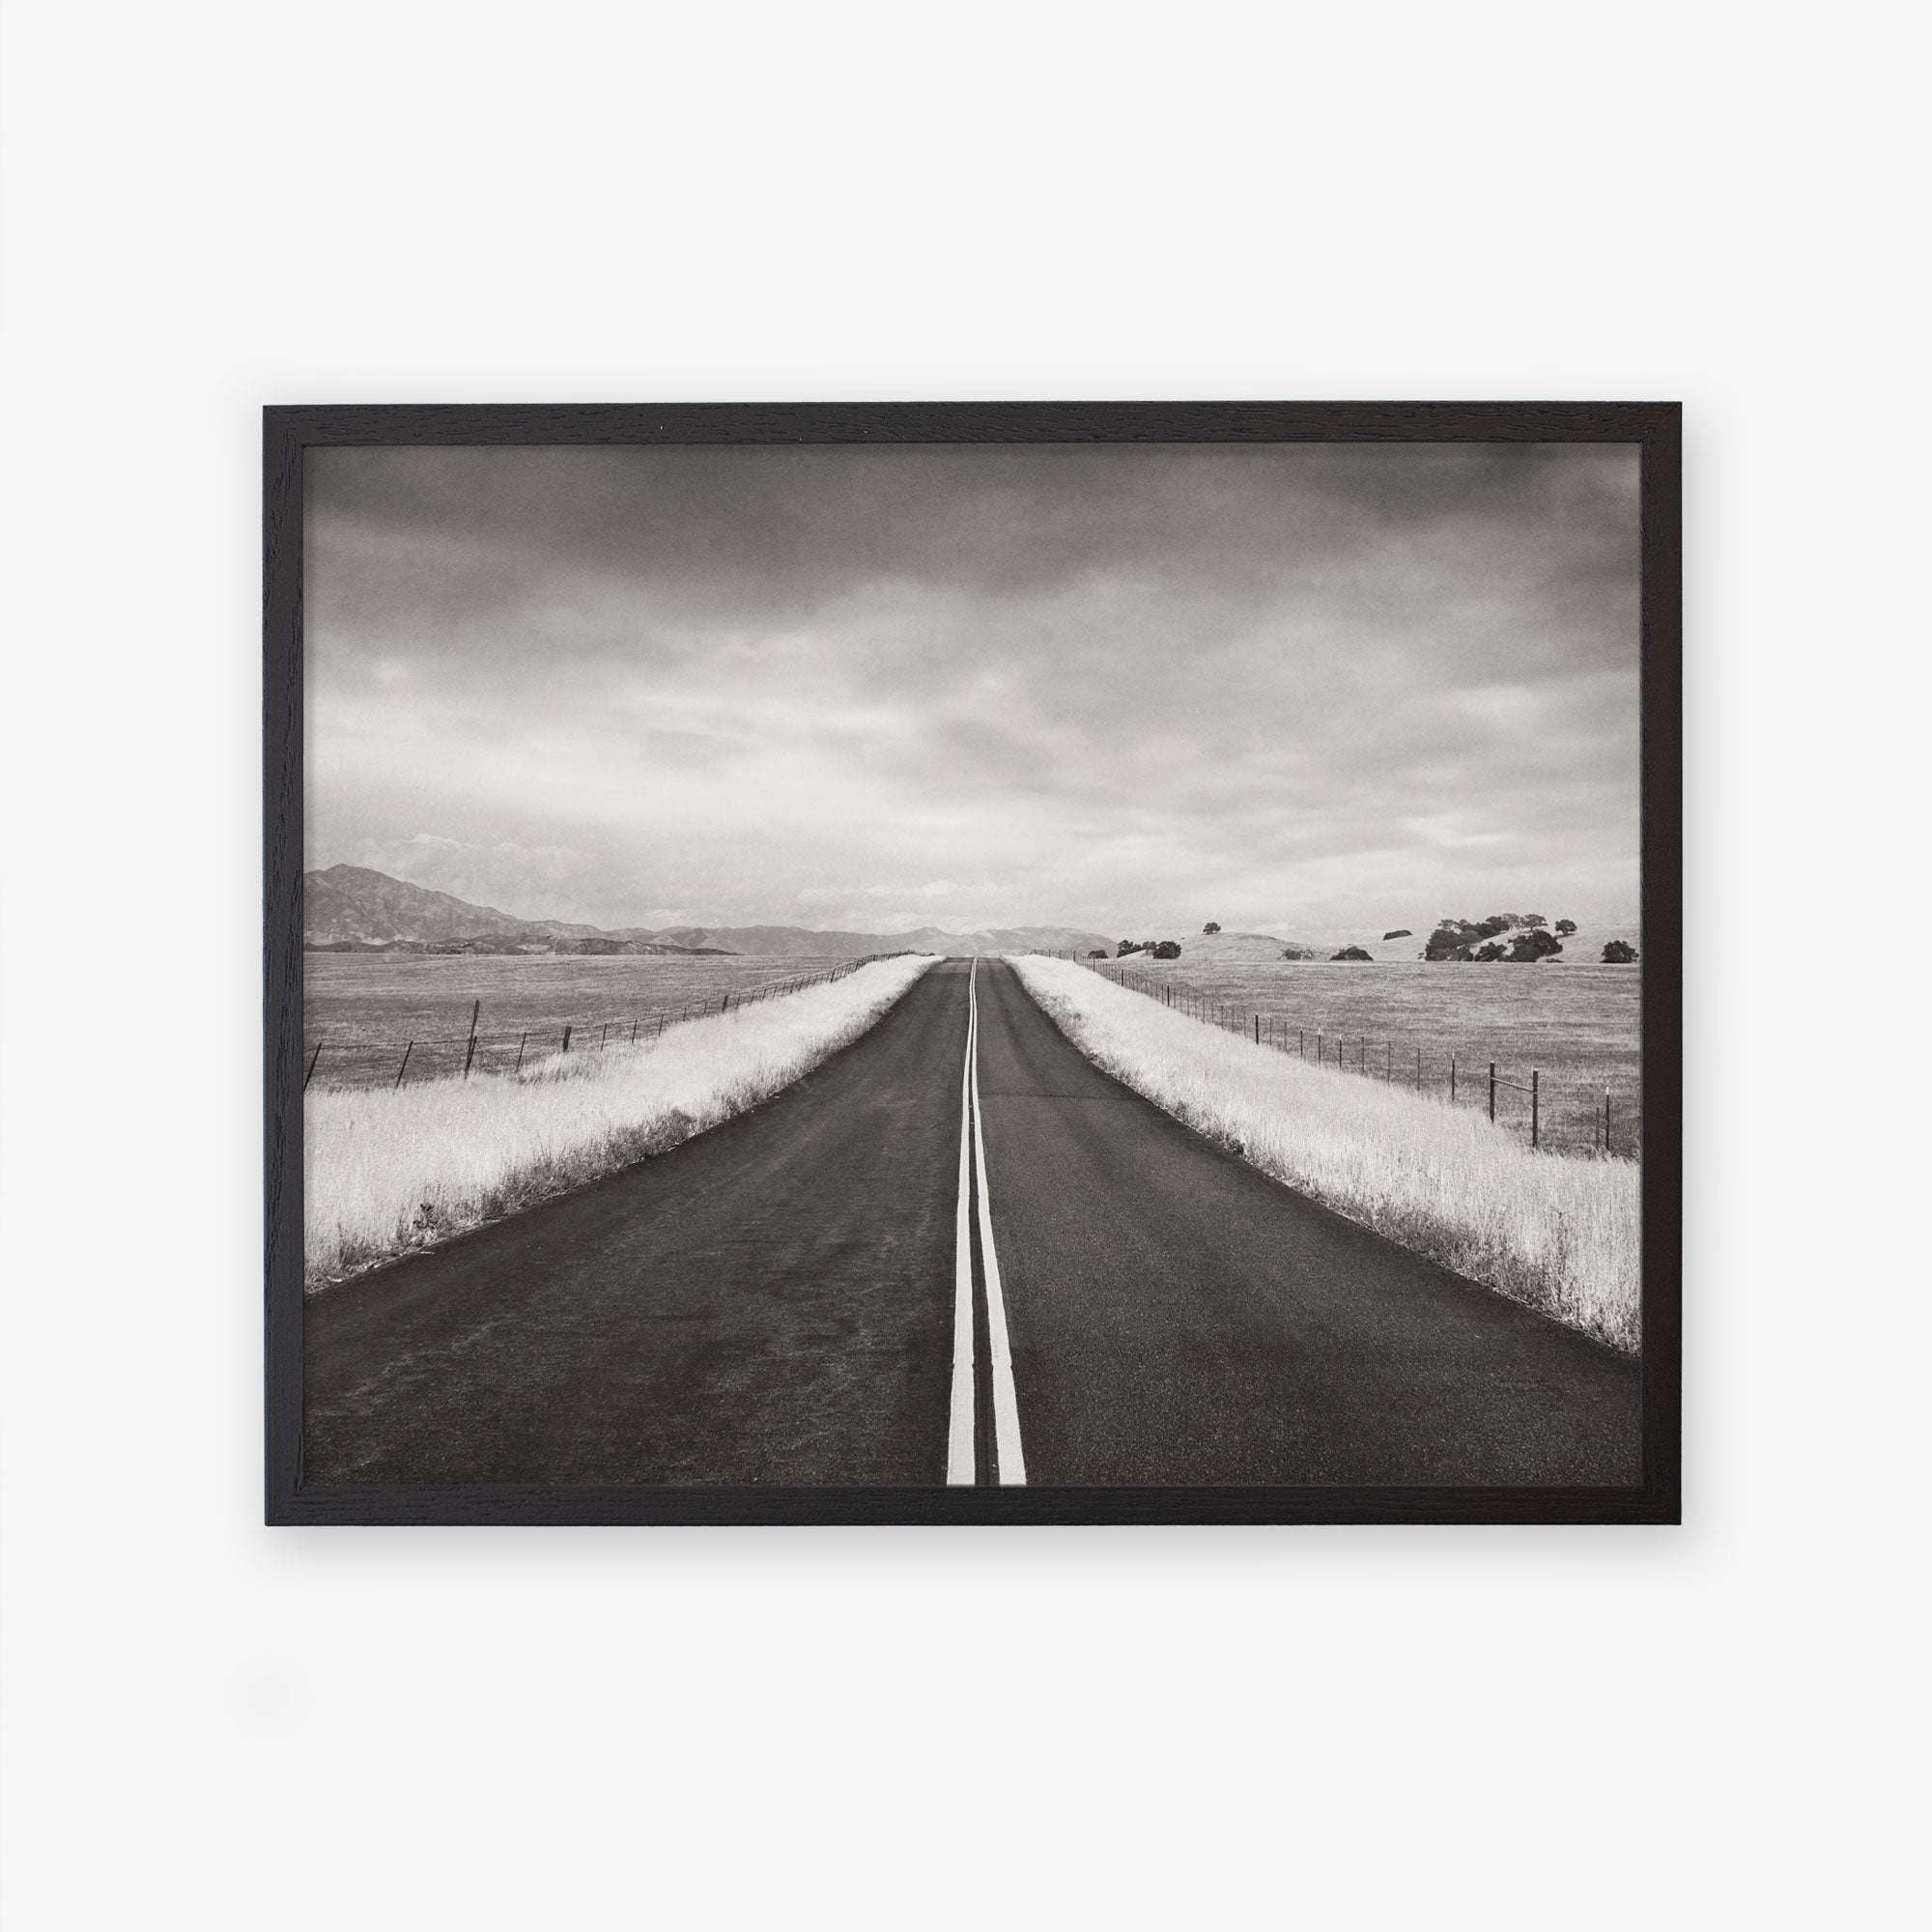 Black and White Rural Landscape Art, &#39;American Road Trip&#39; by Offley Green, printed on archival photographic paper.